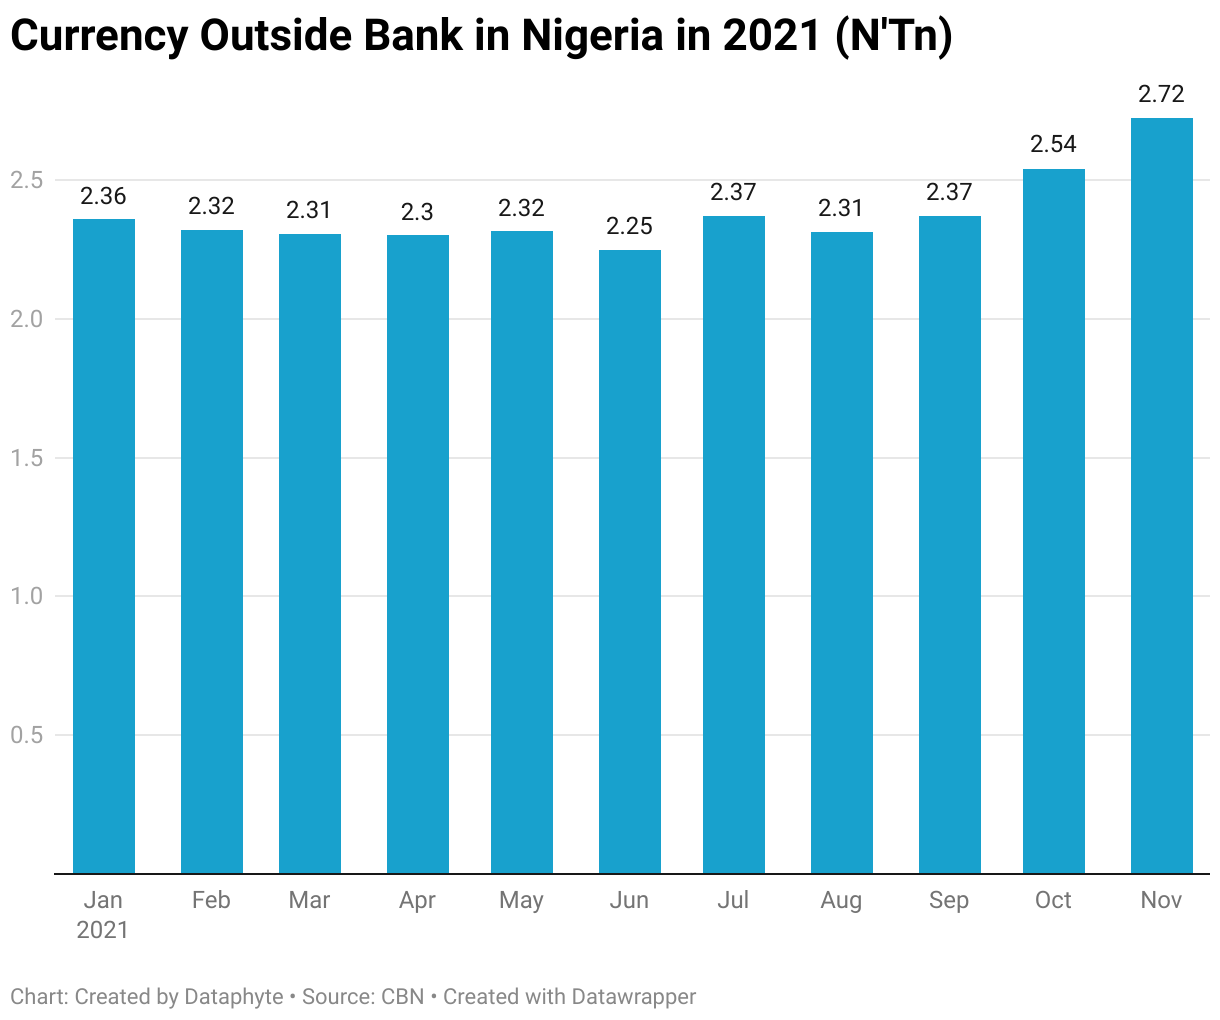 #ChartoftheDay: N26.17 Trillion was Unbanked in 2021